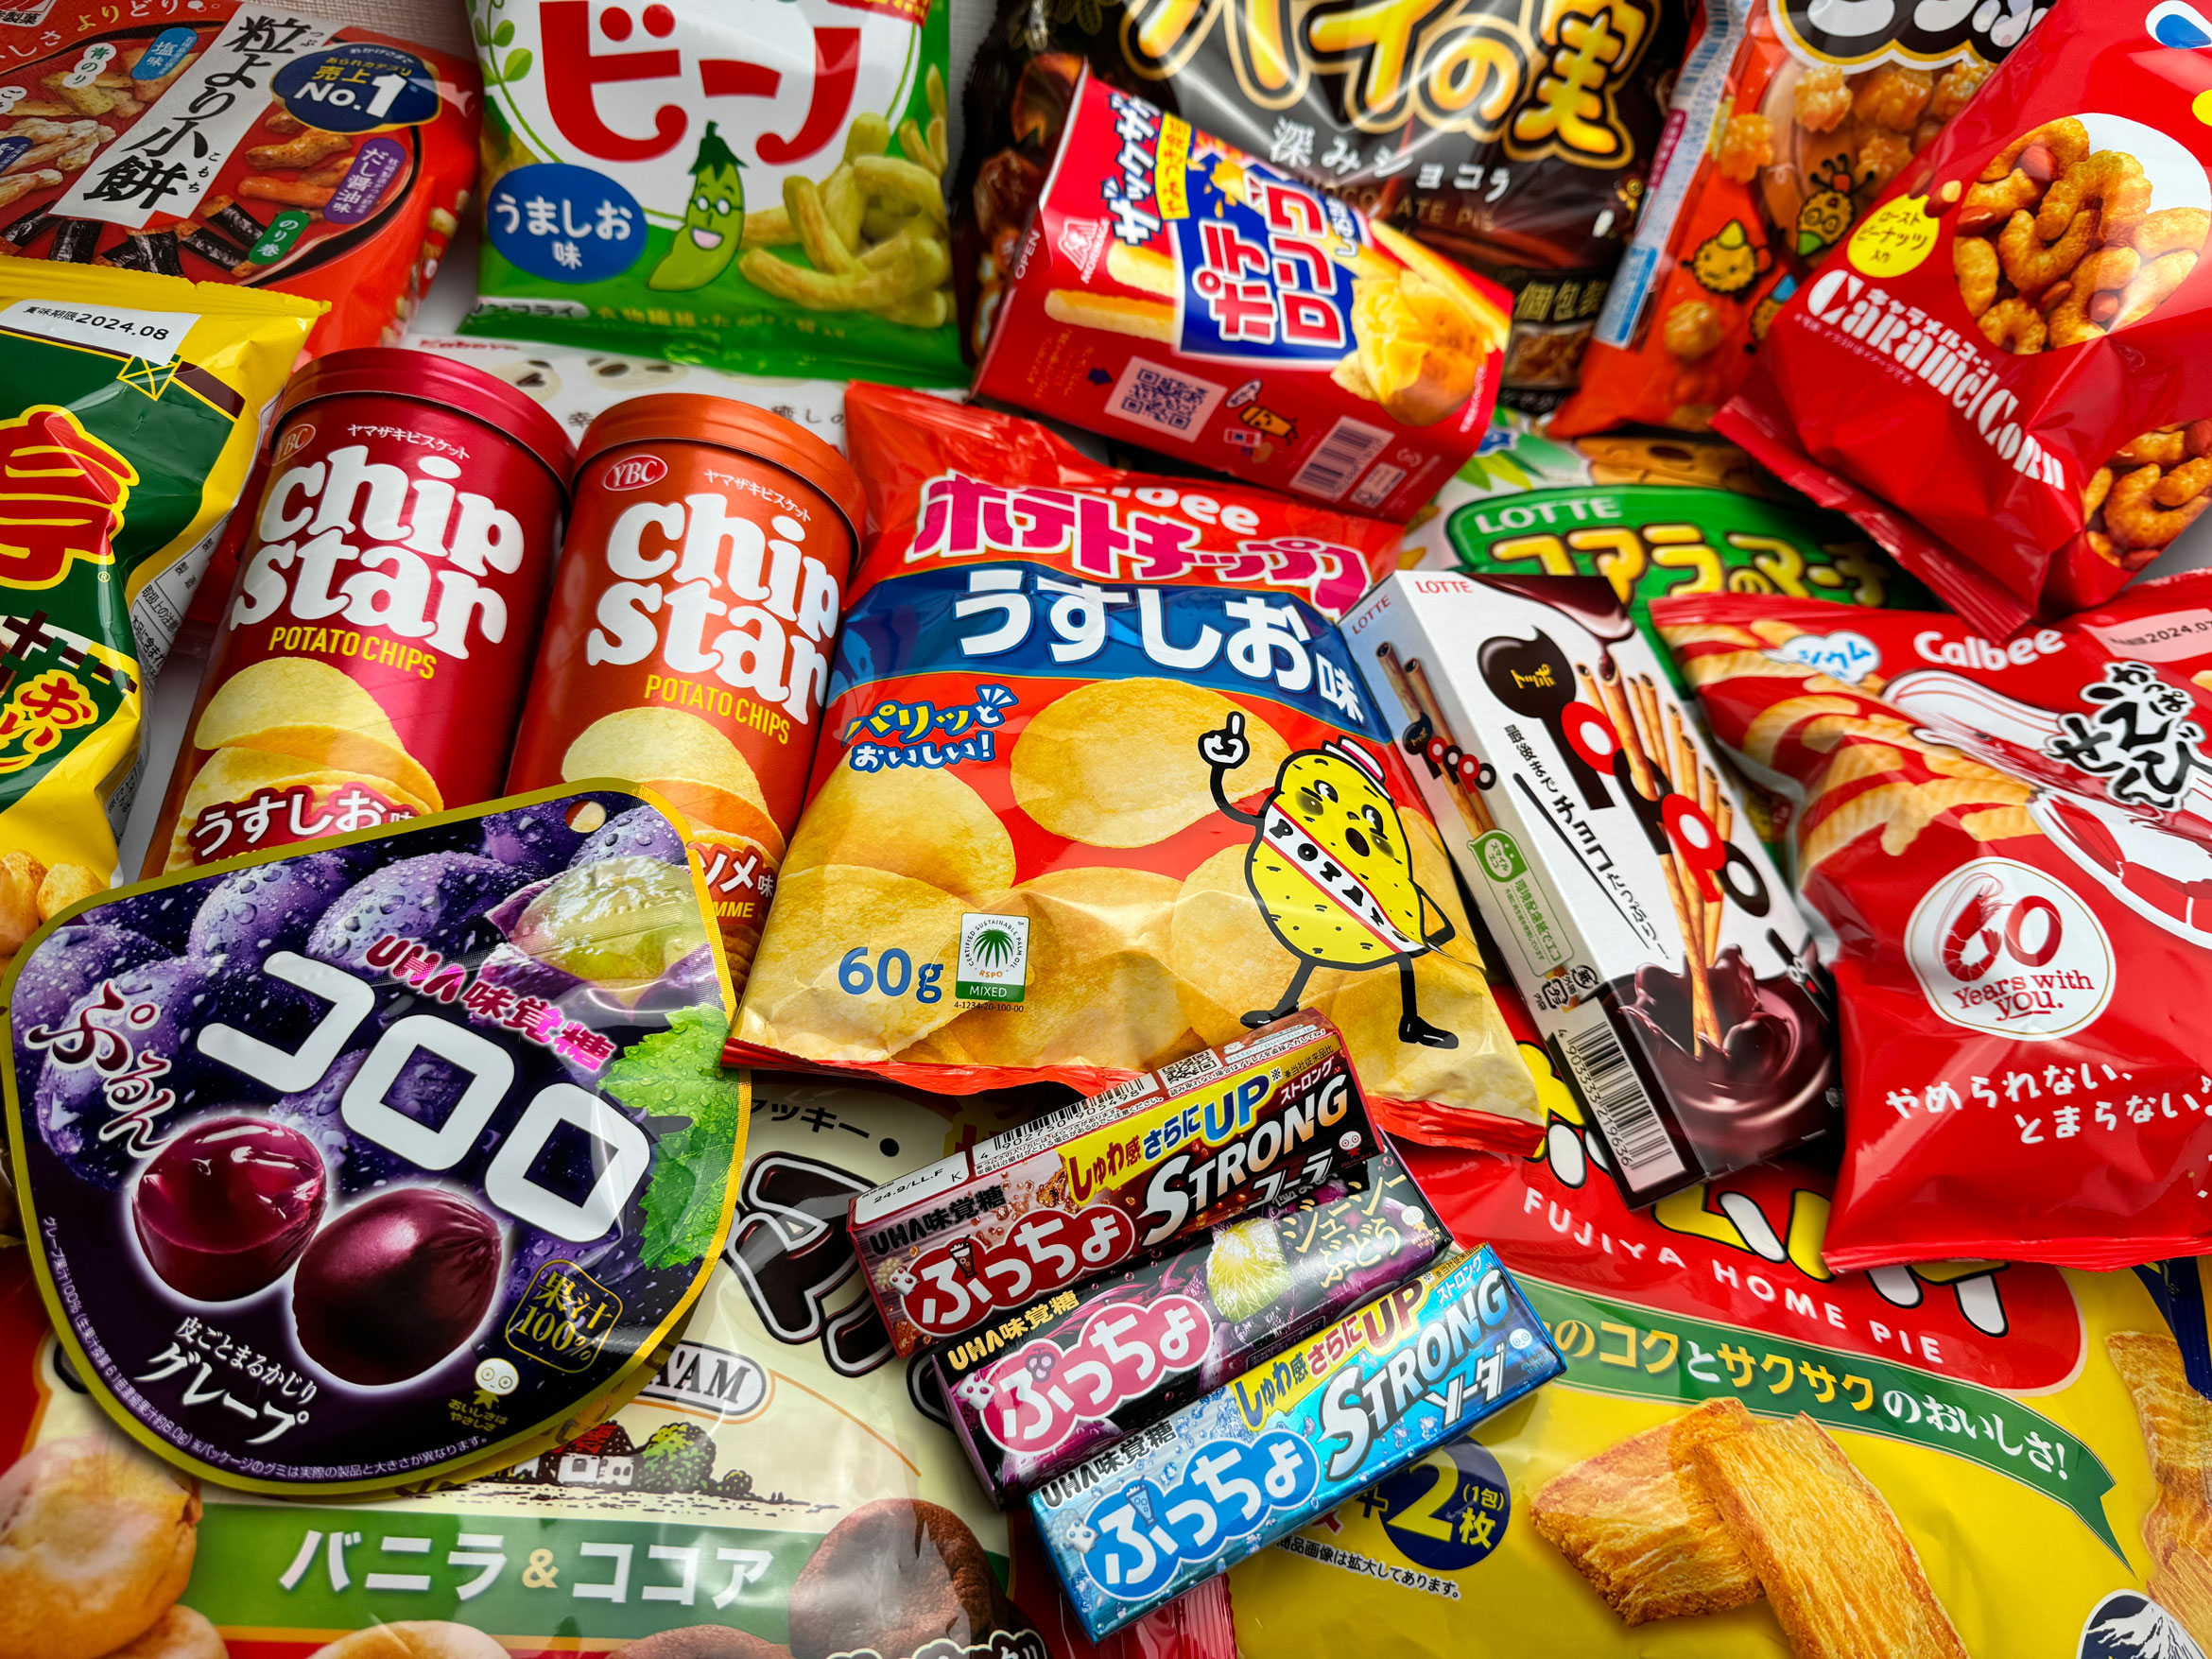 Japan Snack Store | Japan Snack Store is selling a lot of yammi ...